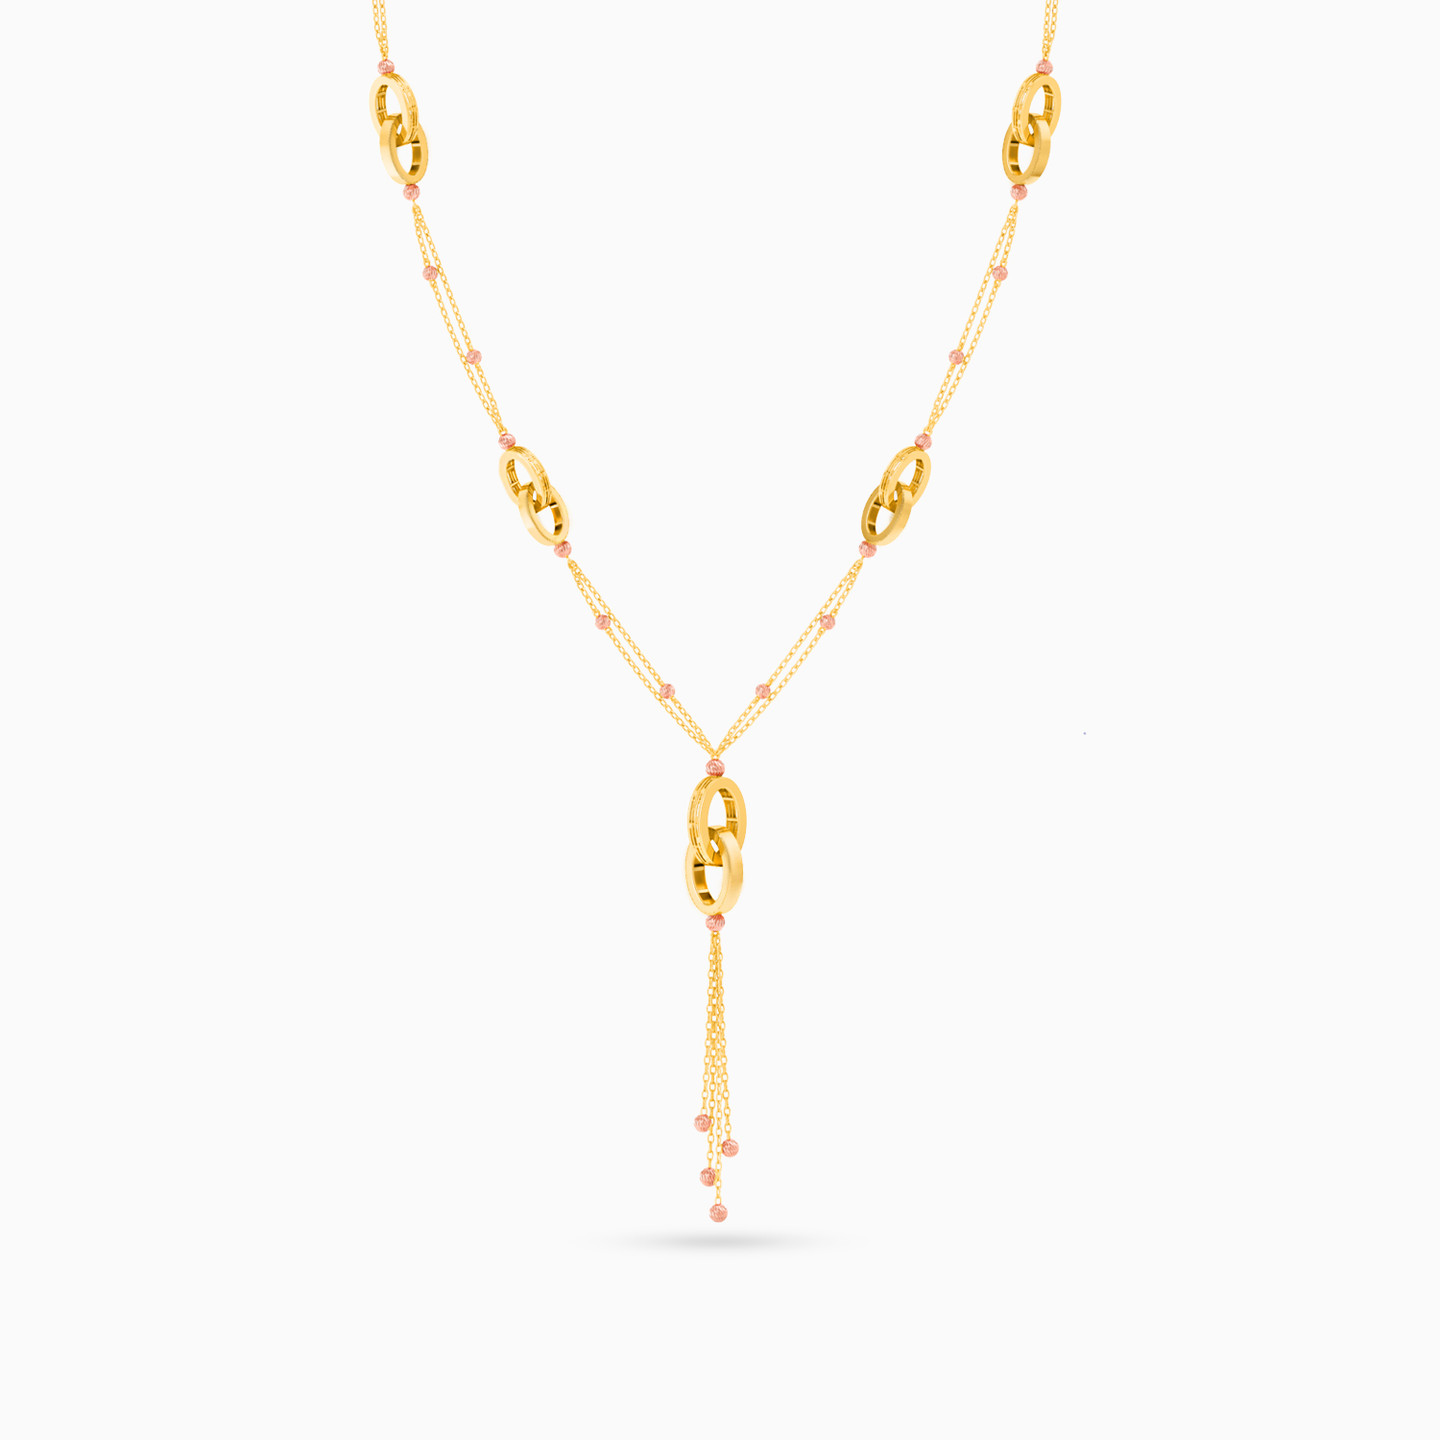 21K Gold Chain Necklace - 3